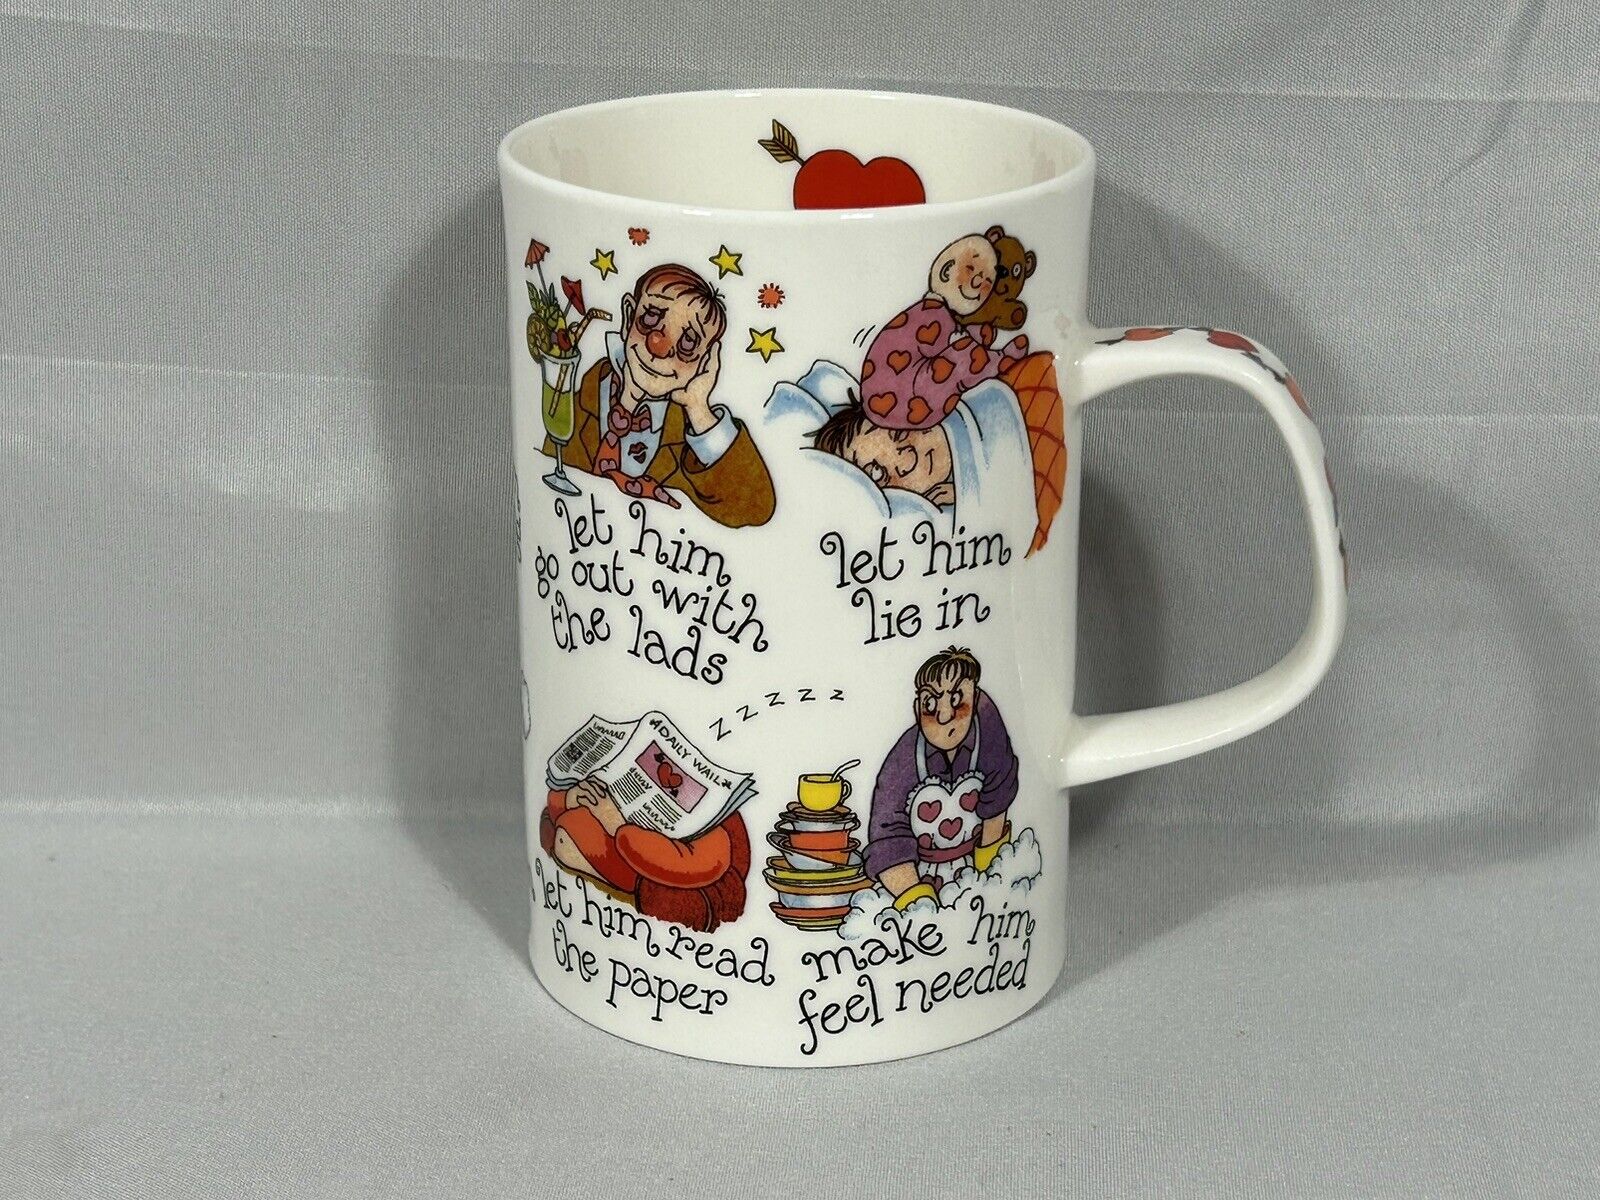 Dunoon His N Hers Mug Cup By Cherry Denman England Novelty Funny 